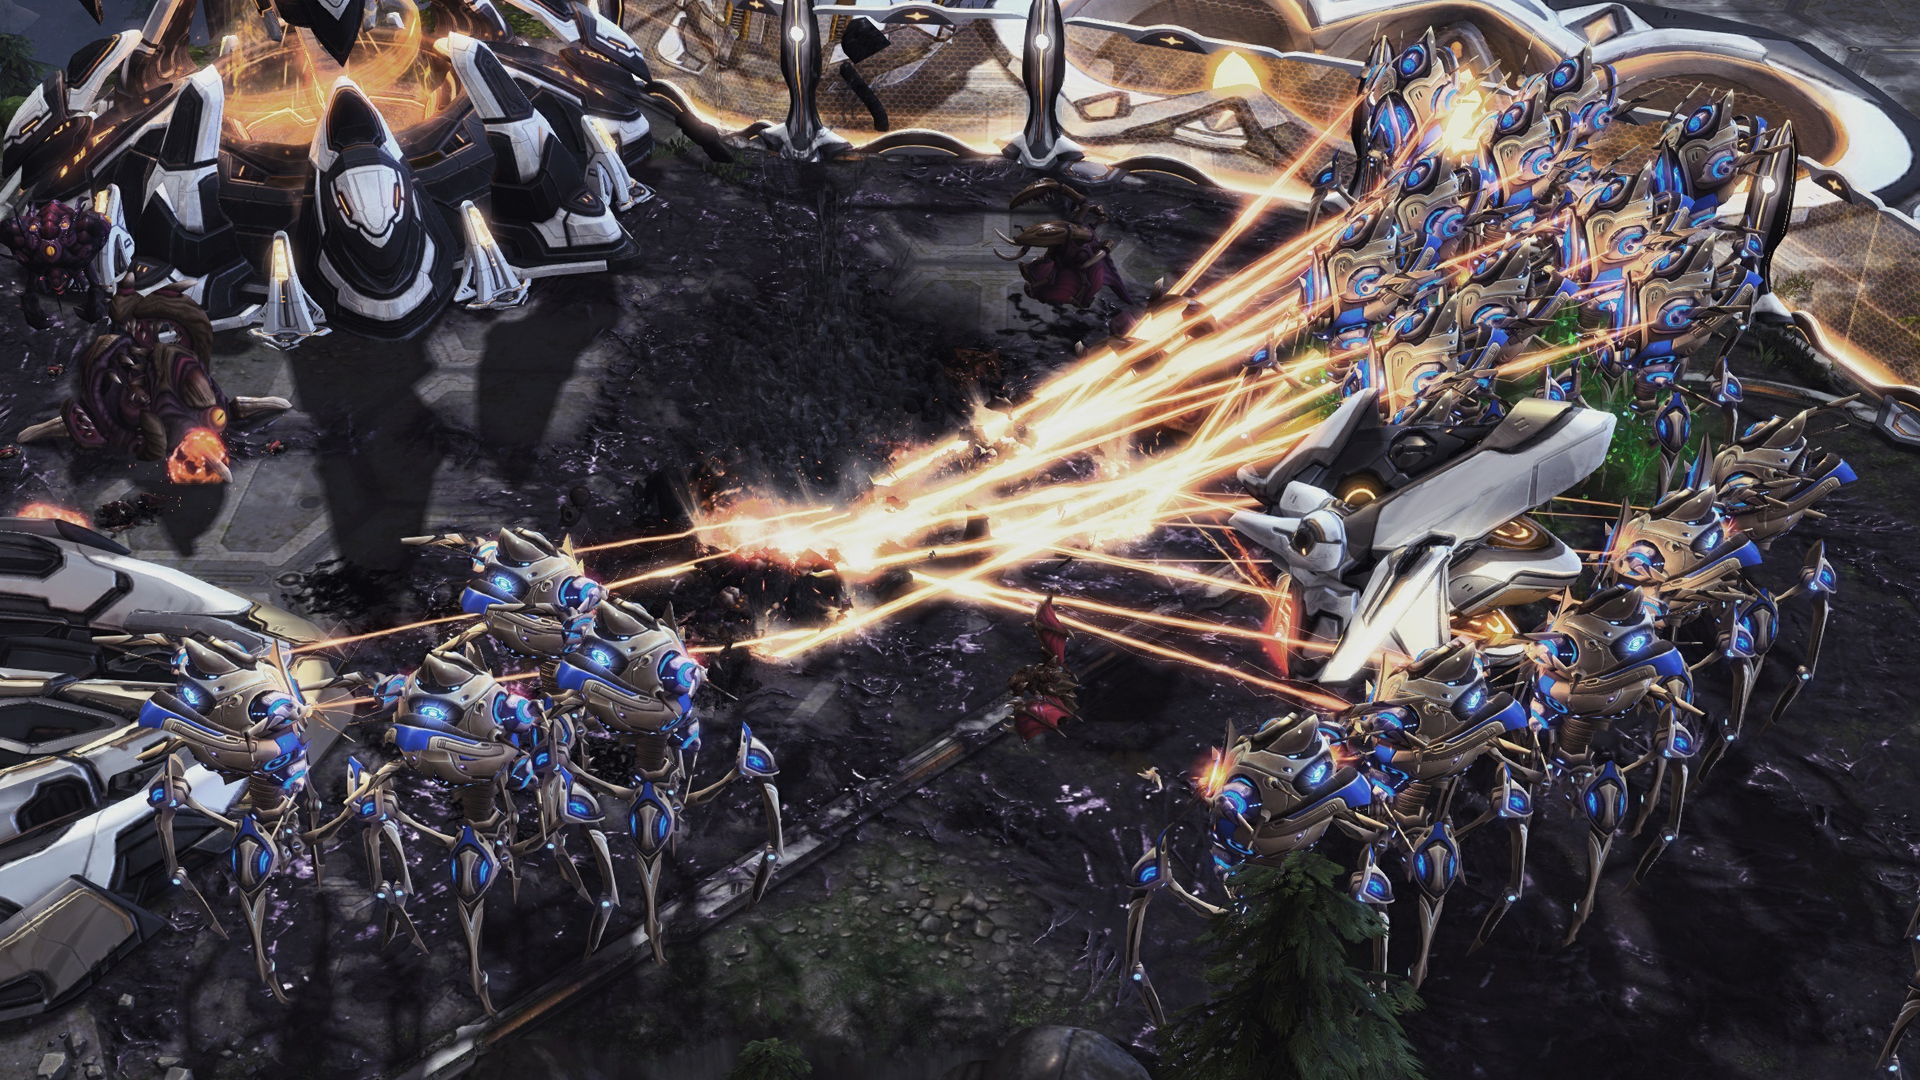 Not So Massively: StarCraft II co-op is one of online gaming's